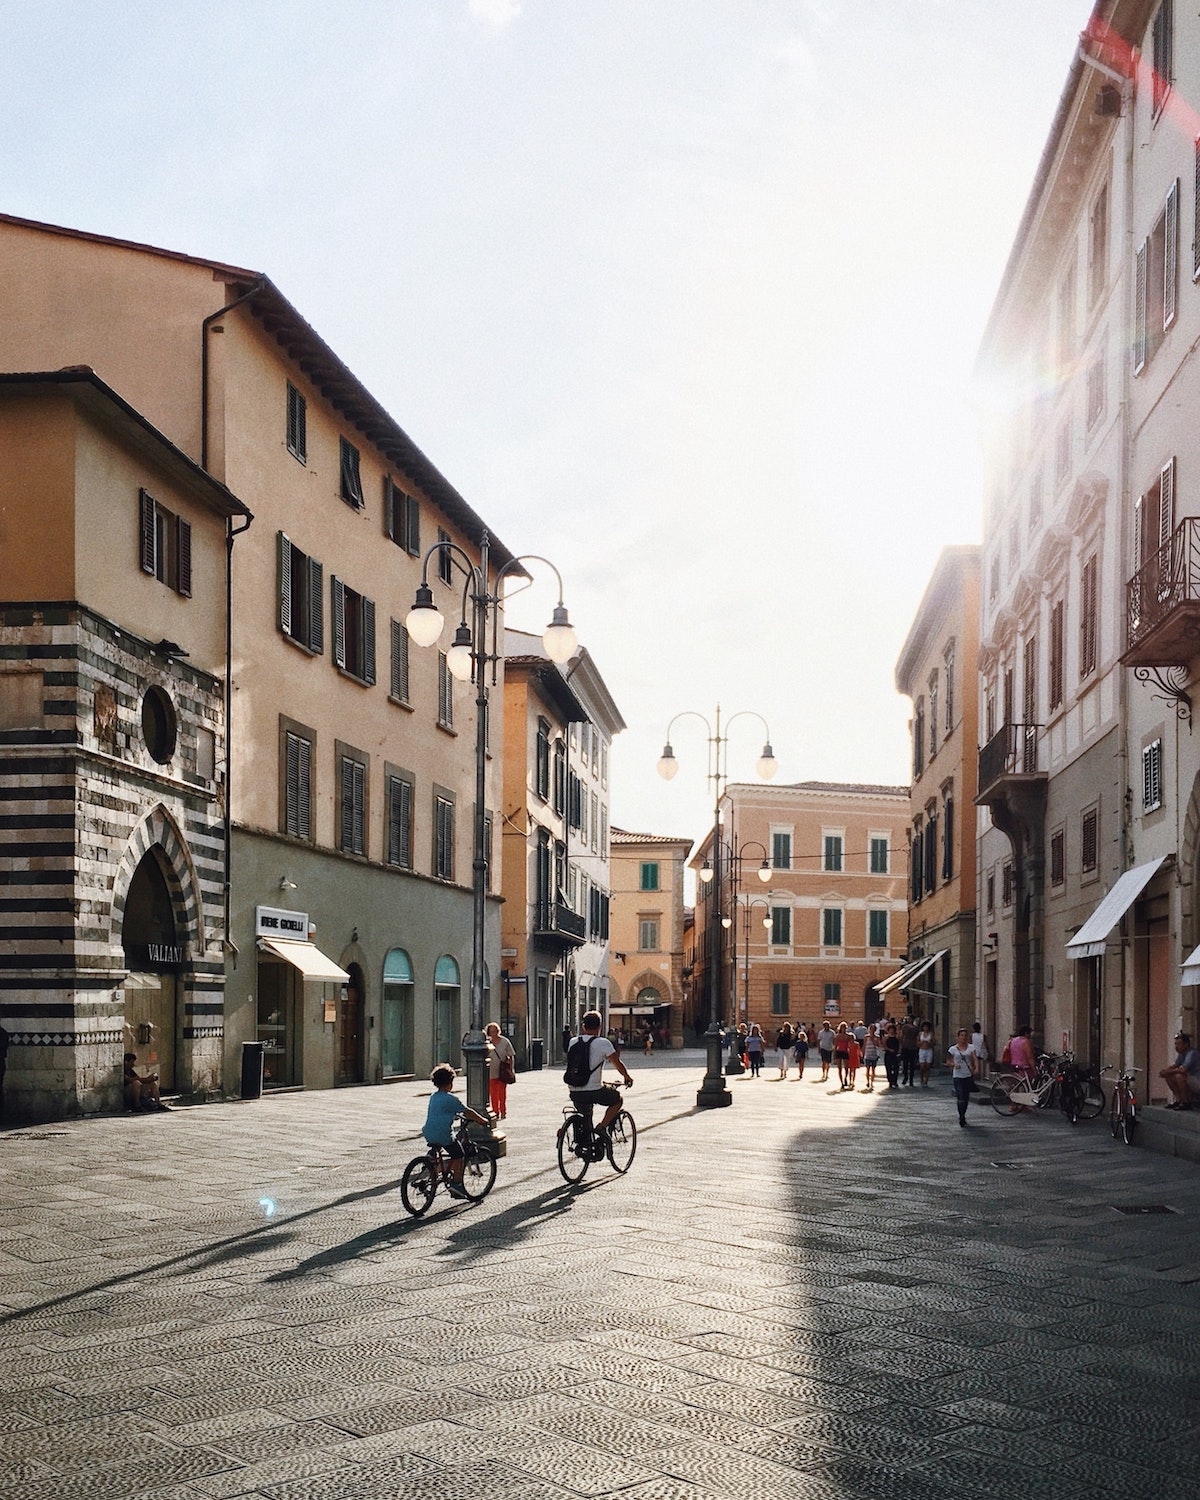 Children riding bikes in a wide pedestrian street in Italy on a sunny day